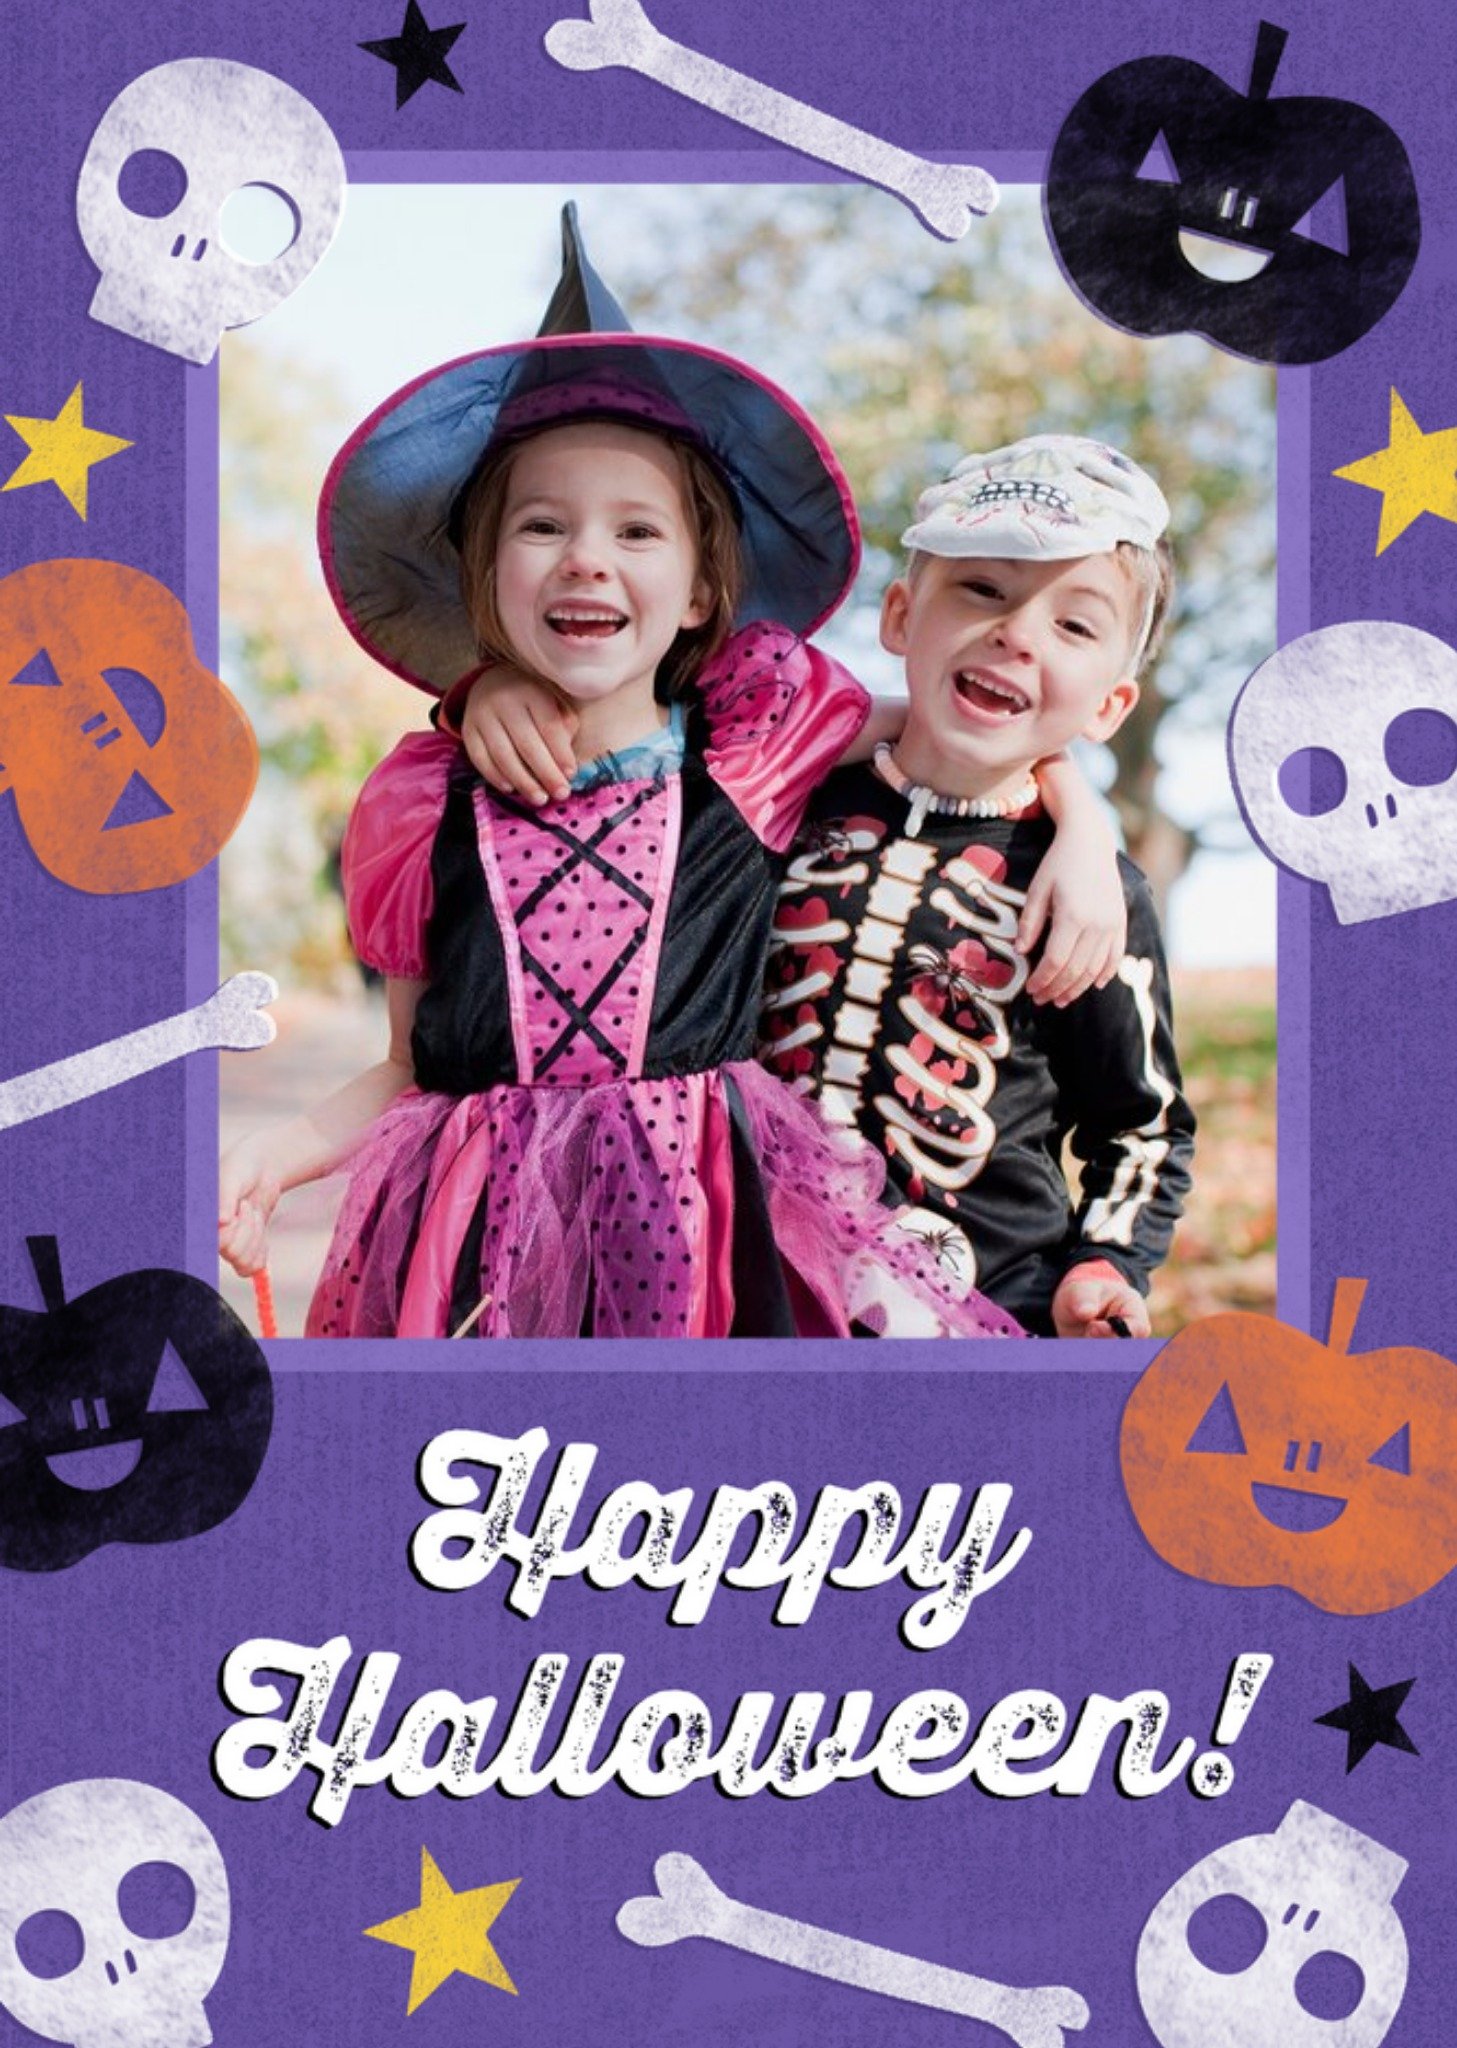 Moonpig Halloween Stamps Photo Card, Large